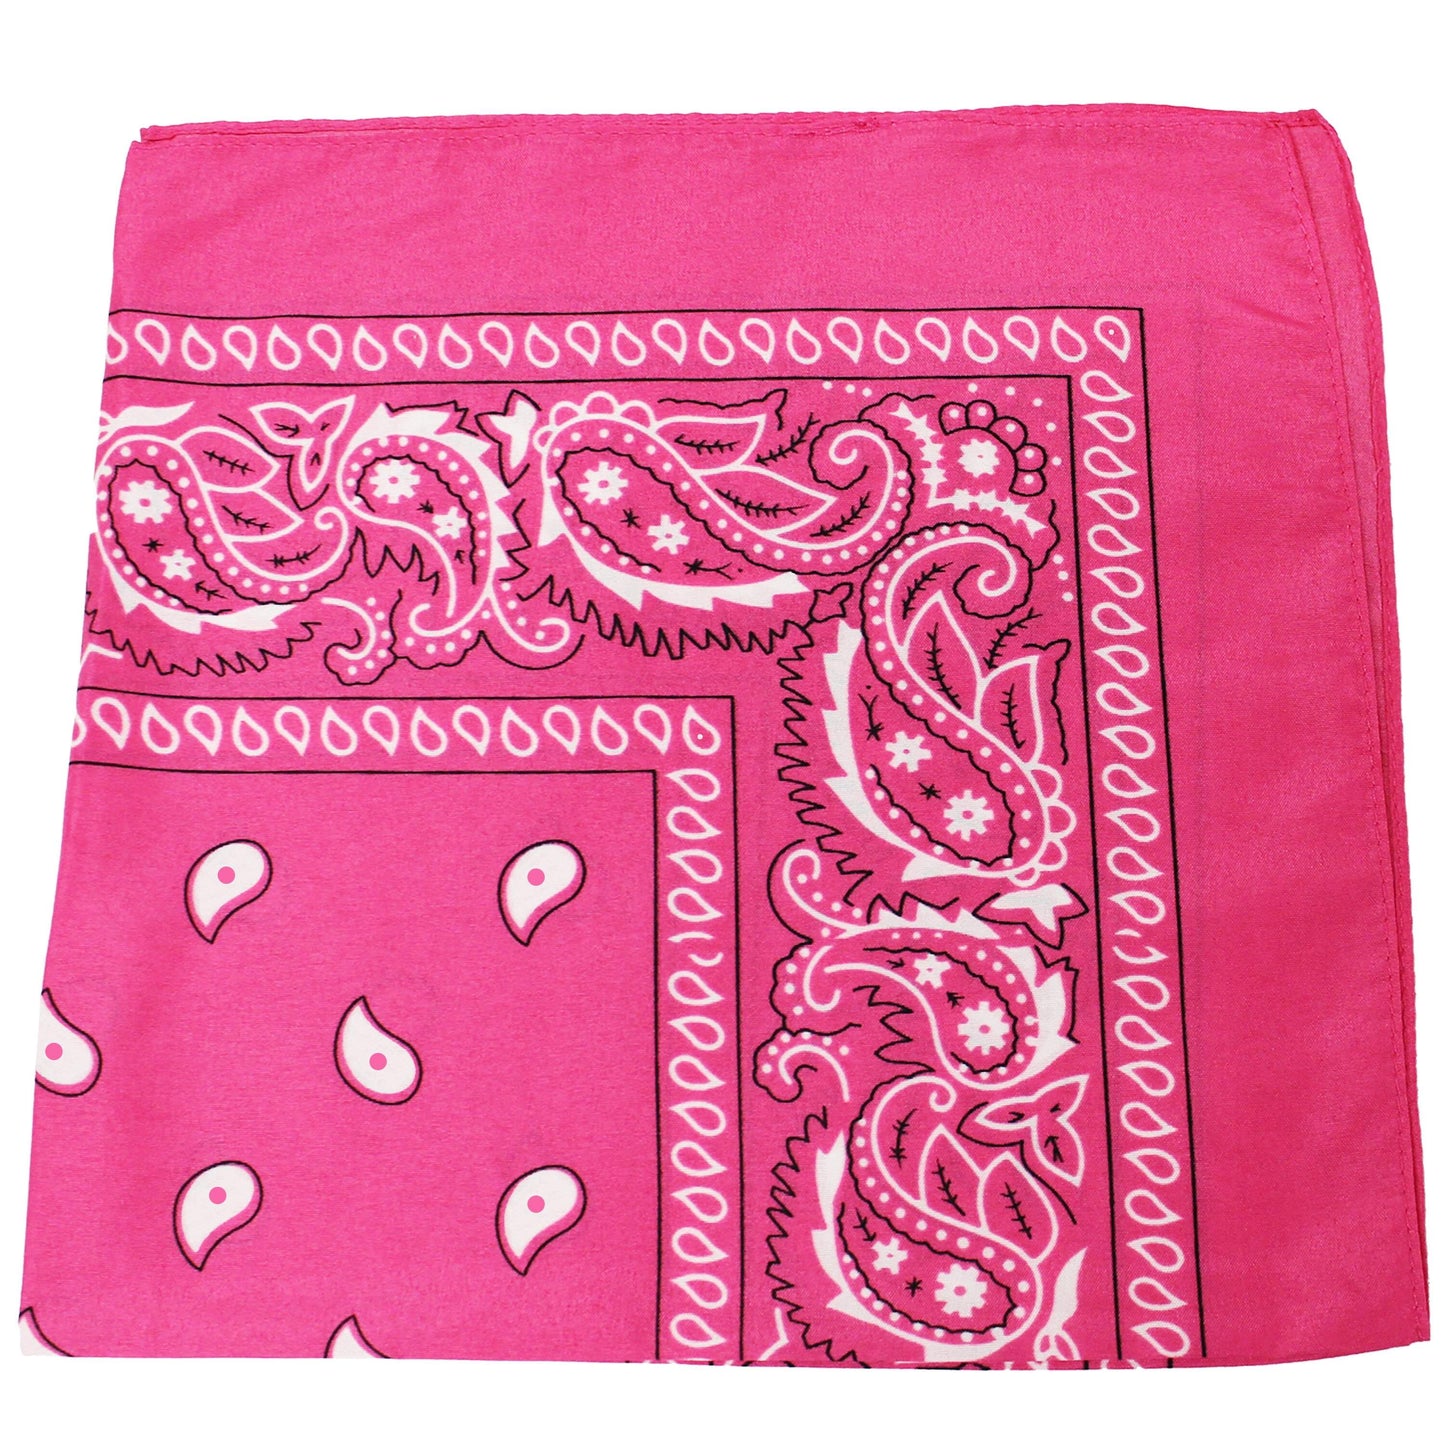 Mechaly Kerchiefs Cotton 22 x 22 In Headband - Paisley and Solid Colors